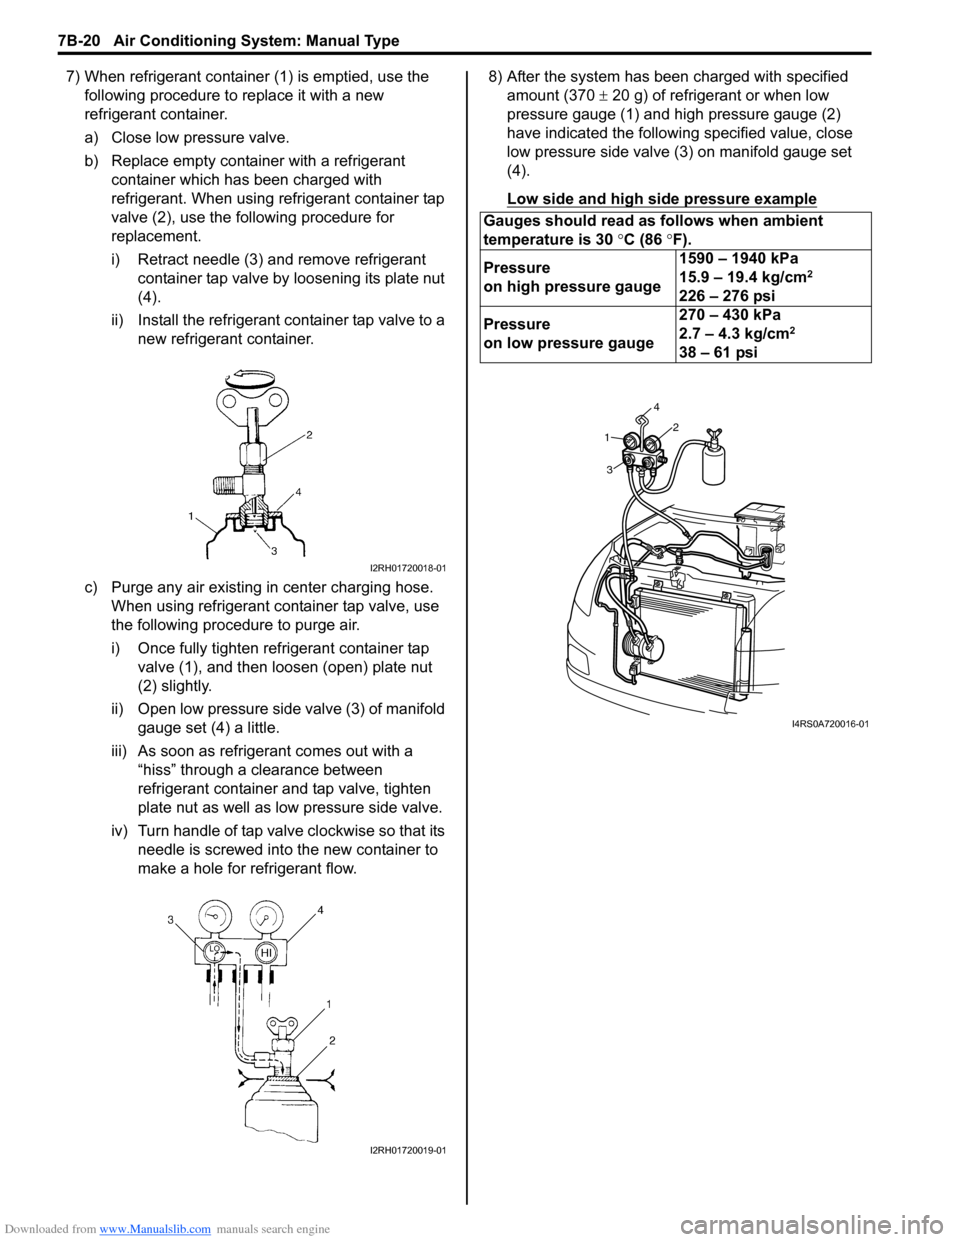 SUZUKI SWIFT 2007 2.G Service Workshop Manual Downloaded from www.Manualslib.com manuals search engine 7B-20 Air Conditioning System: Manual Type
7) When refrigerant container (1) is emptied, use the following procedure to replace it with a new 
